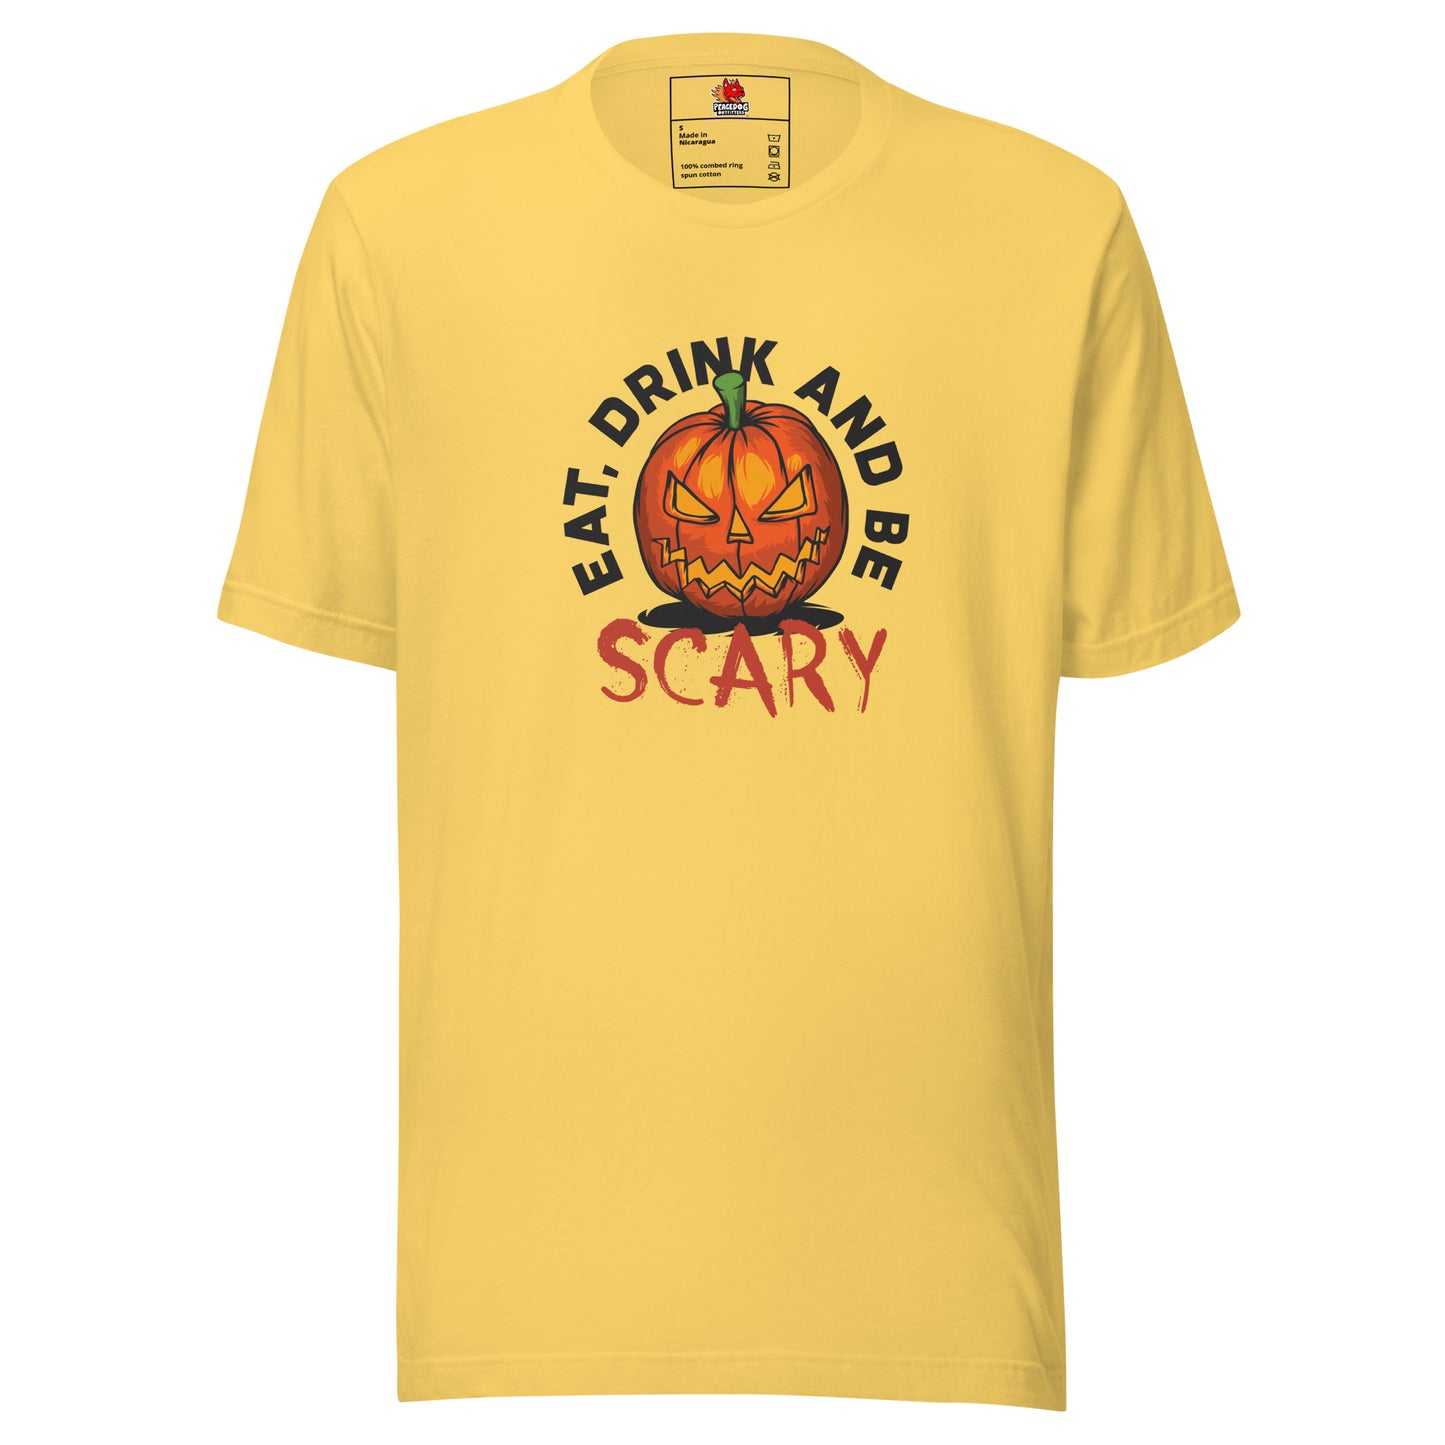 Eat, Drink, and be Scary T-shirt